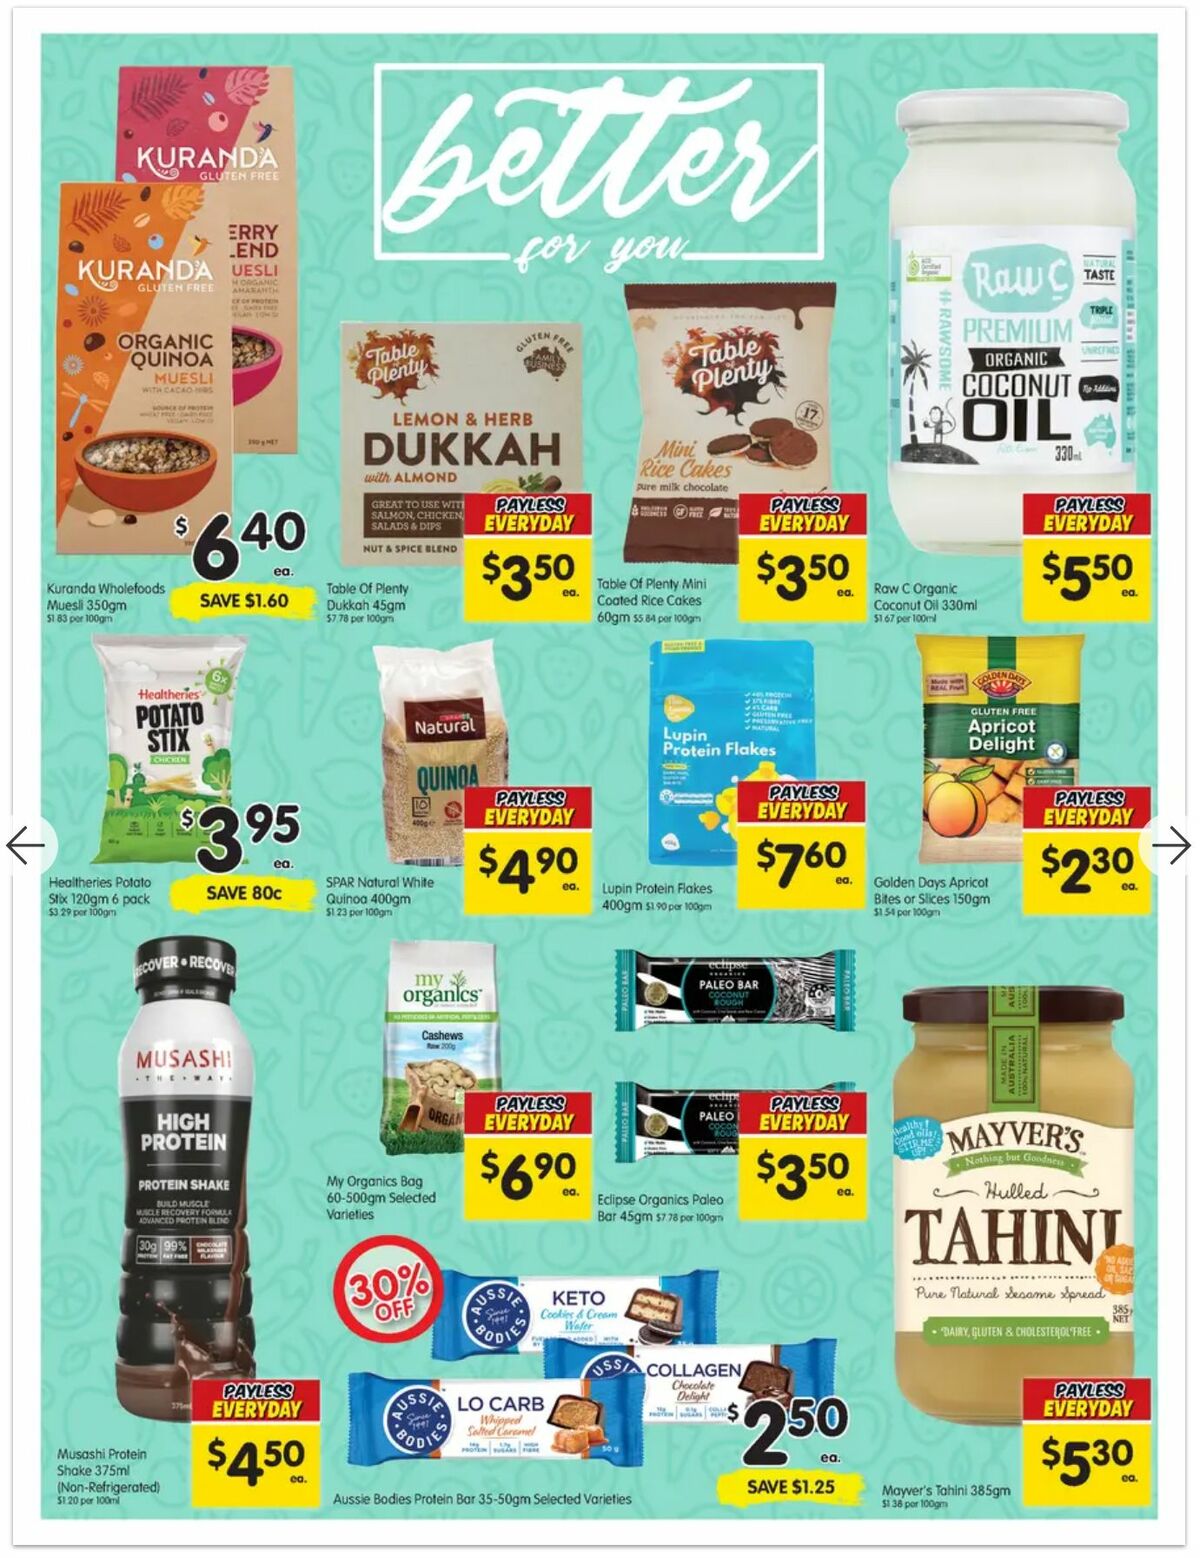 Spar Catalogues from 11 August